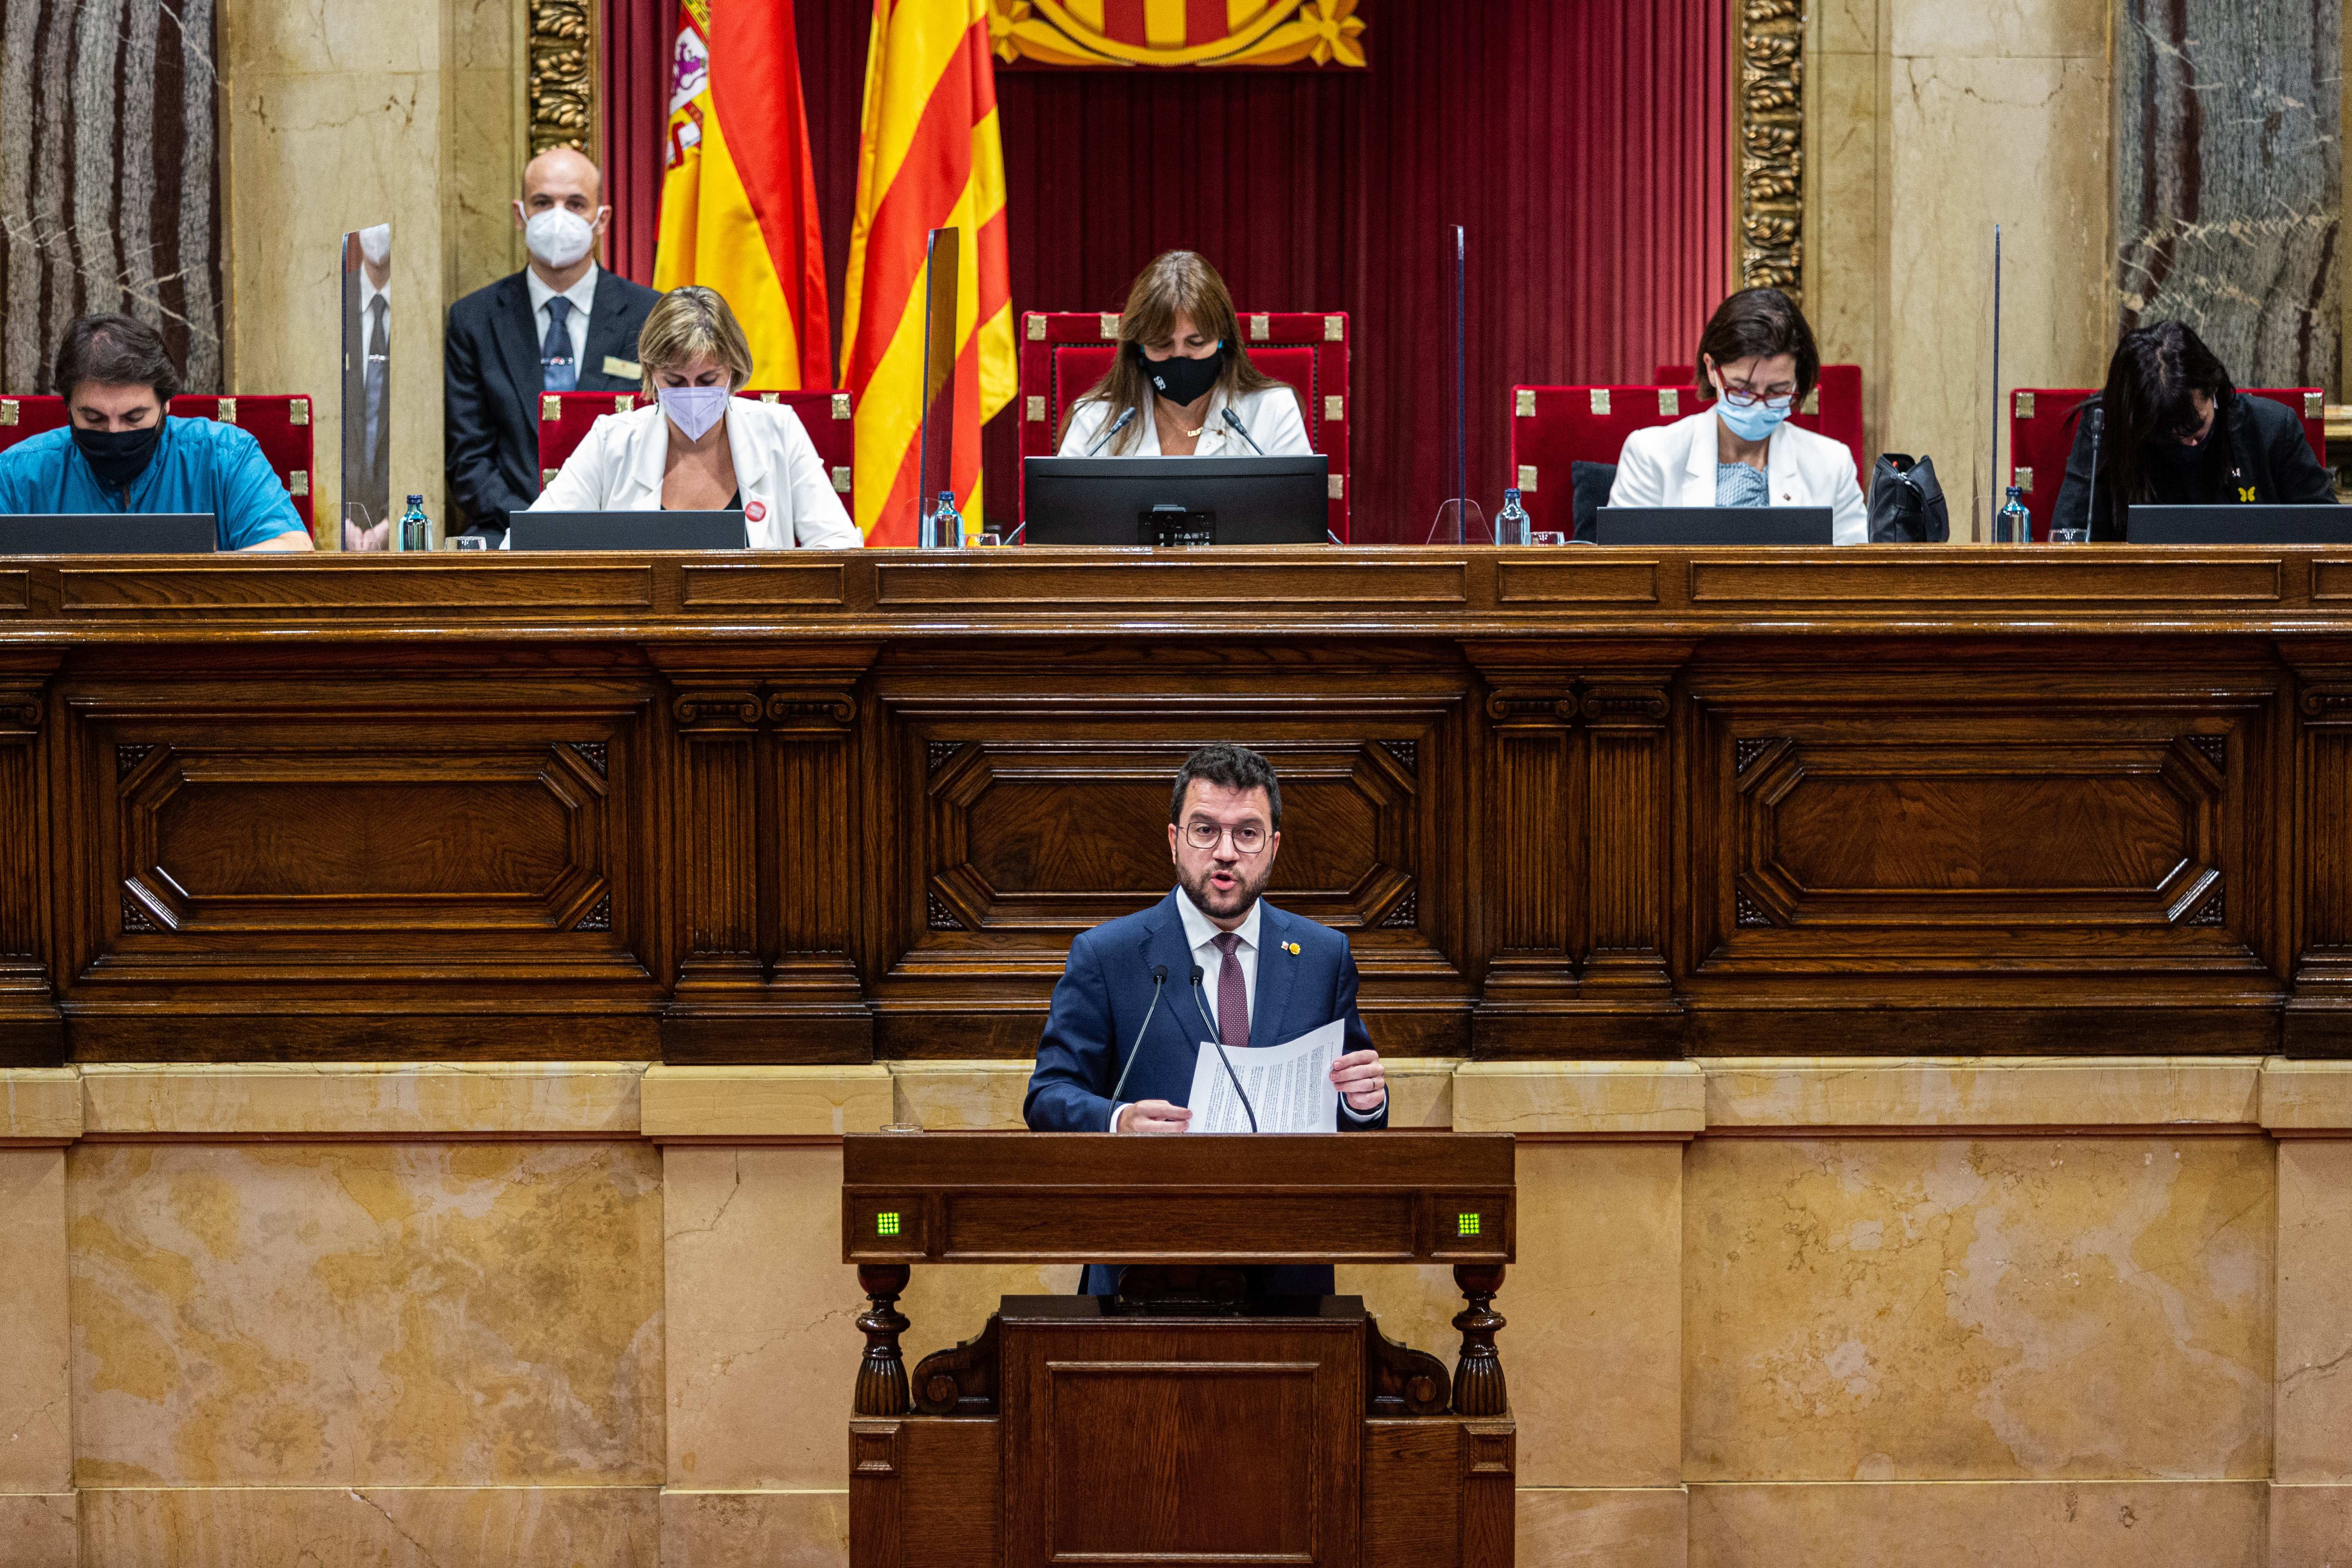 Aragonès in the Catalan Parliament: "Let's not underestimate the dialogue table"